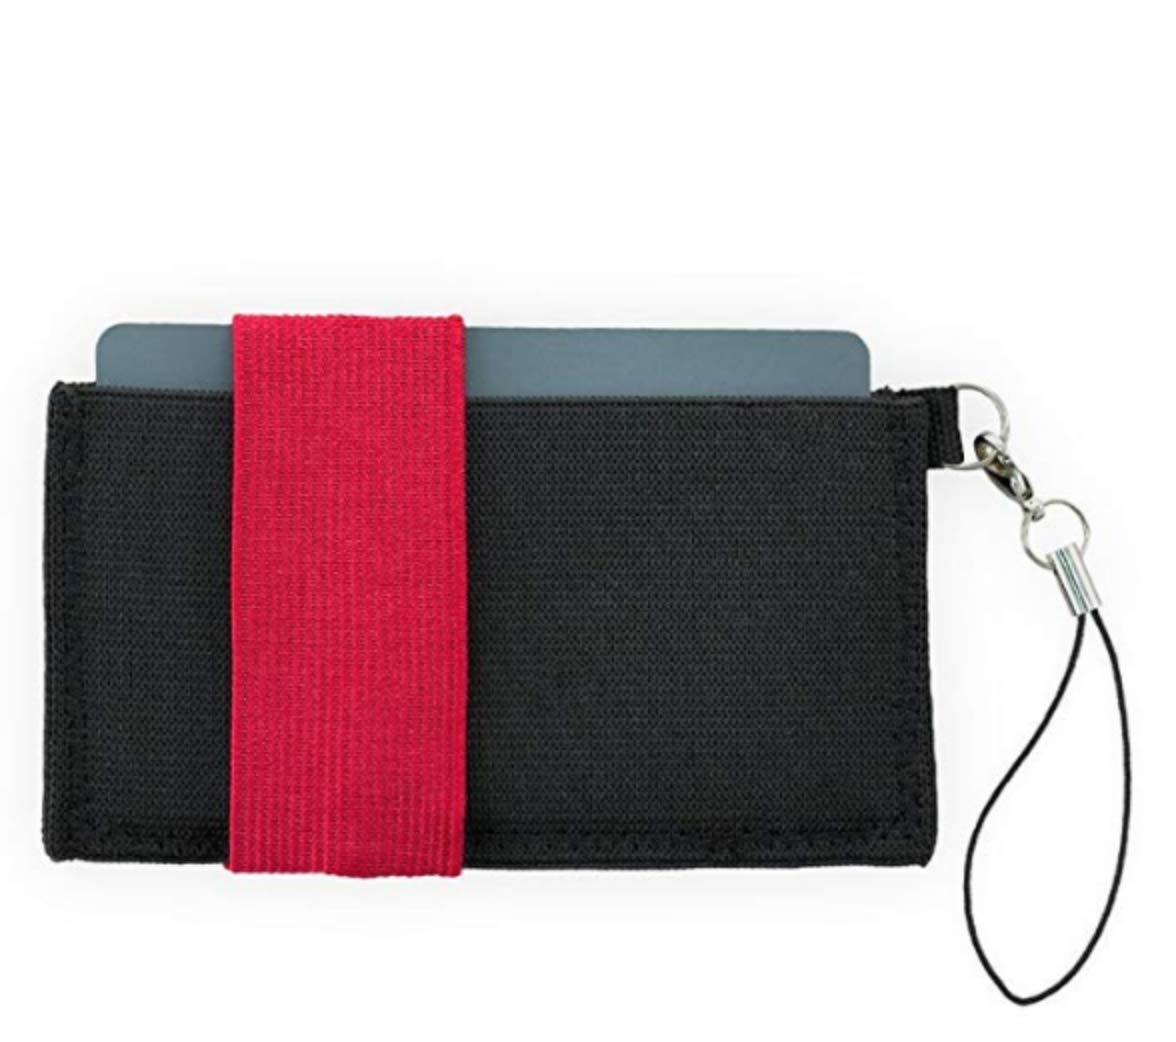 Crabby Gear - Front Pocket Wallet - Minimalist Wallet - Red - Elastic - Everyday Carry Cards, Cash, Phone, Keys - Securely Holds for Easy Access - Lobster Claw Keychain Included- Ultra Thin 4